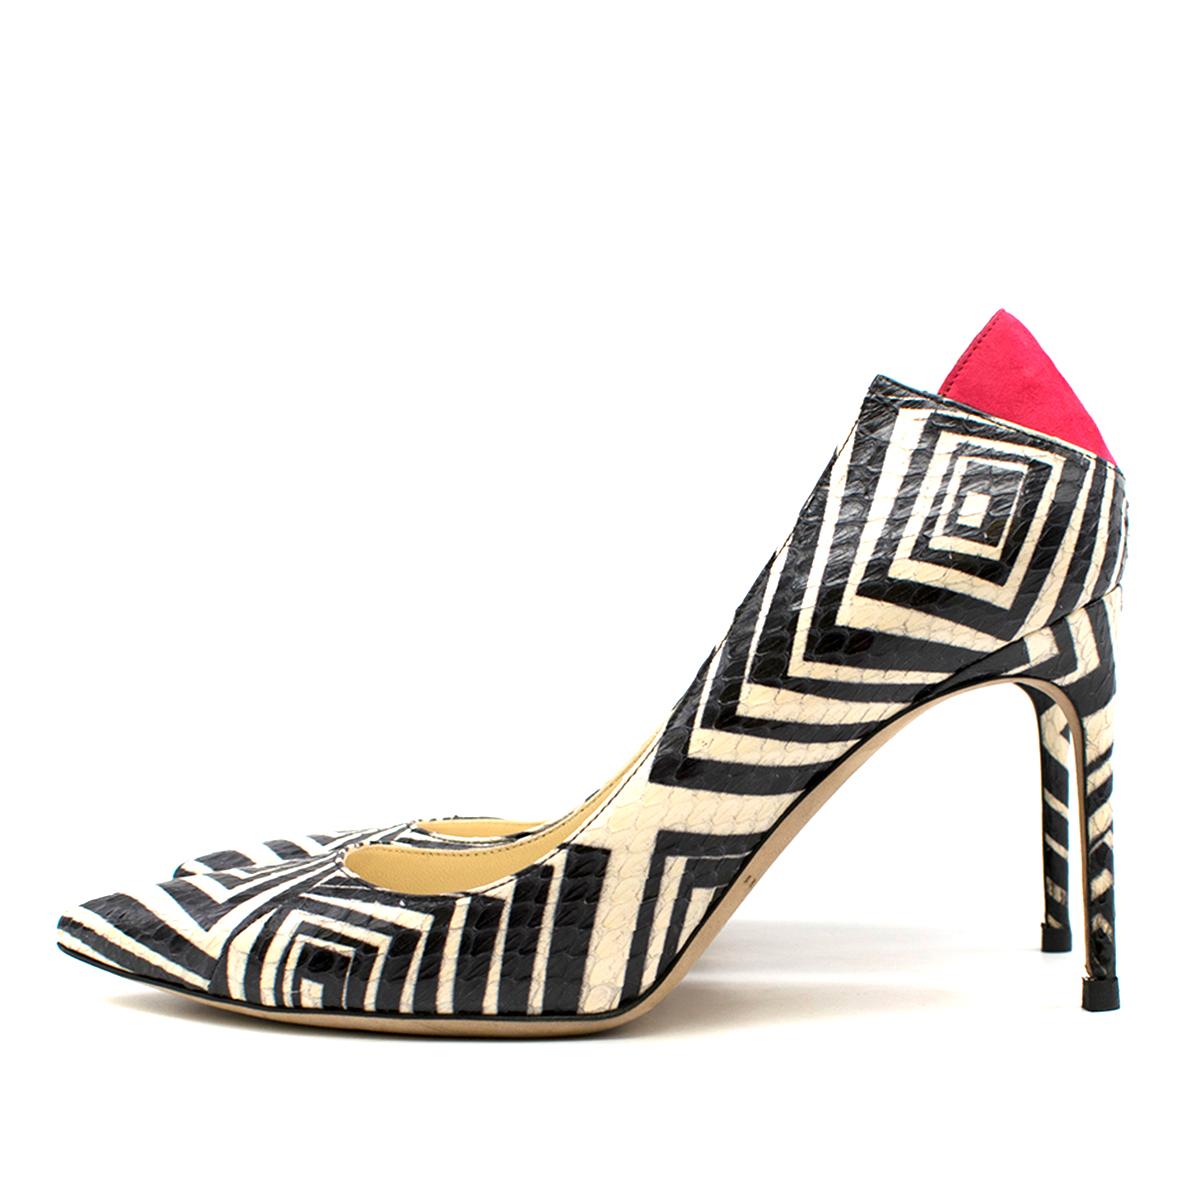 Beige Brian Atwood Geometric Snake Skin Leather Pumps	39 (IT) For Sale